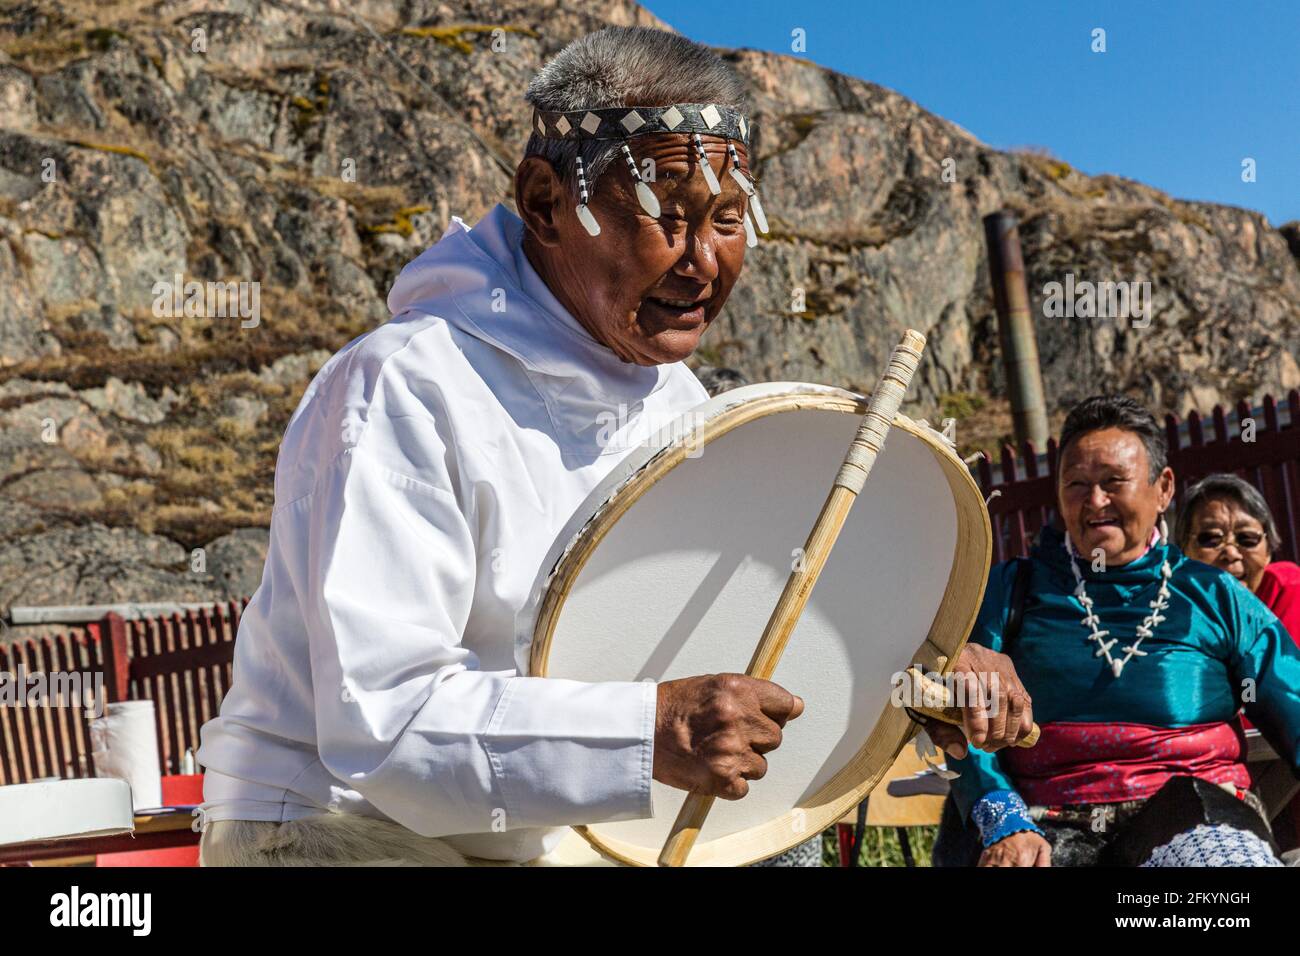 Traditional dance performed by Inuit elders in full regalia in Sisimiut, Holsteinsborg, Greenland. Stock Photo